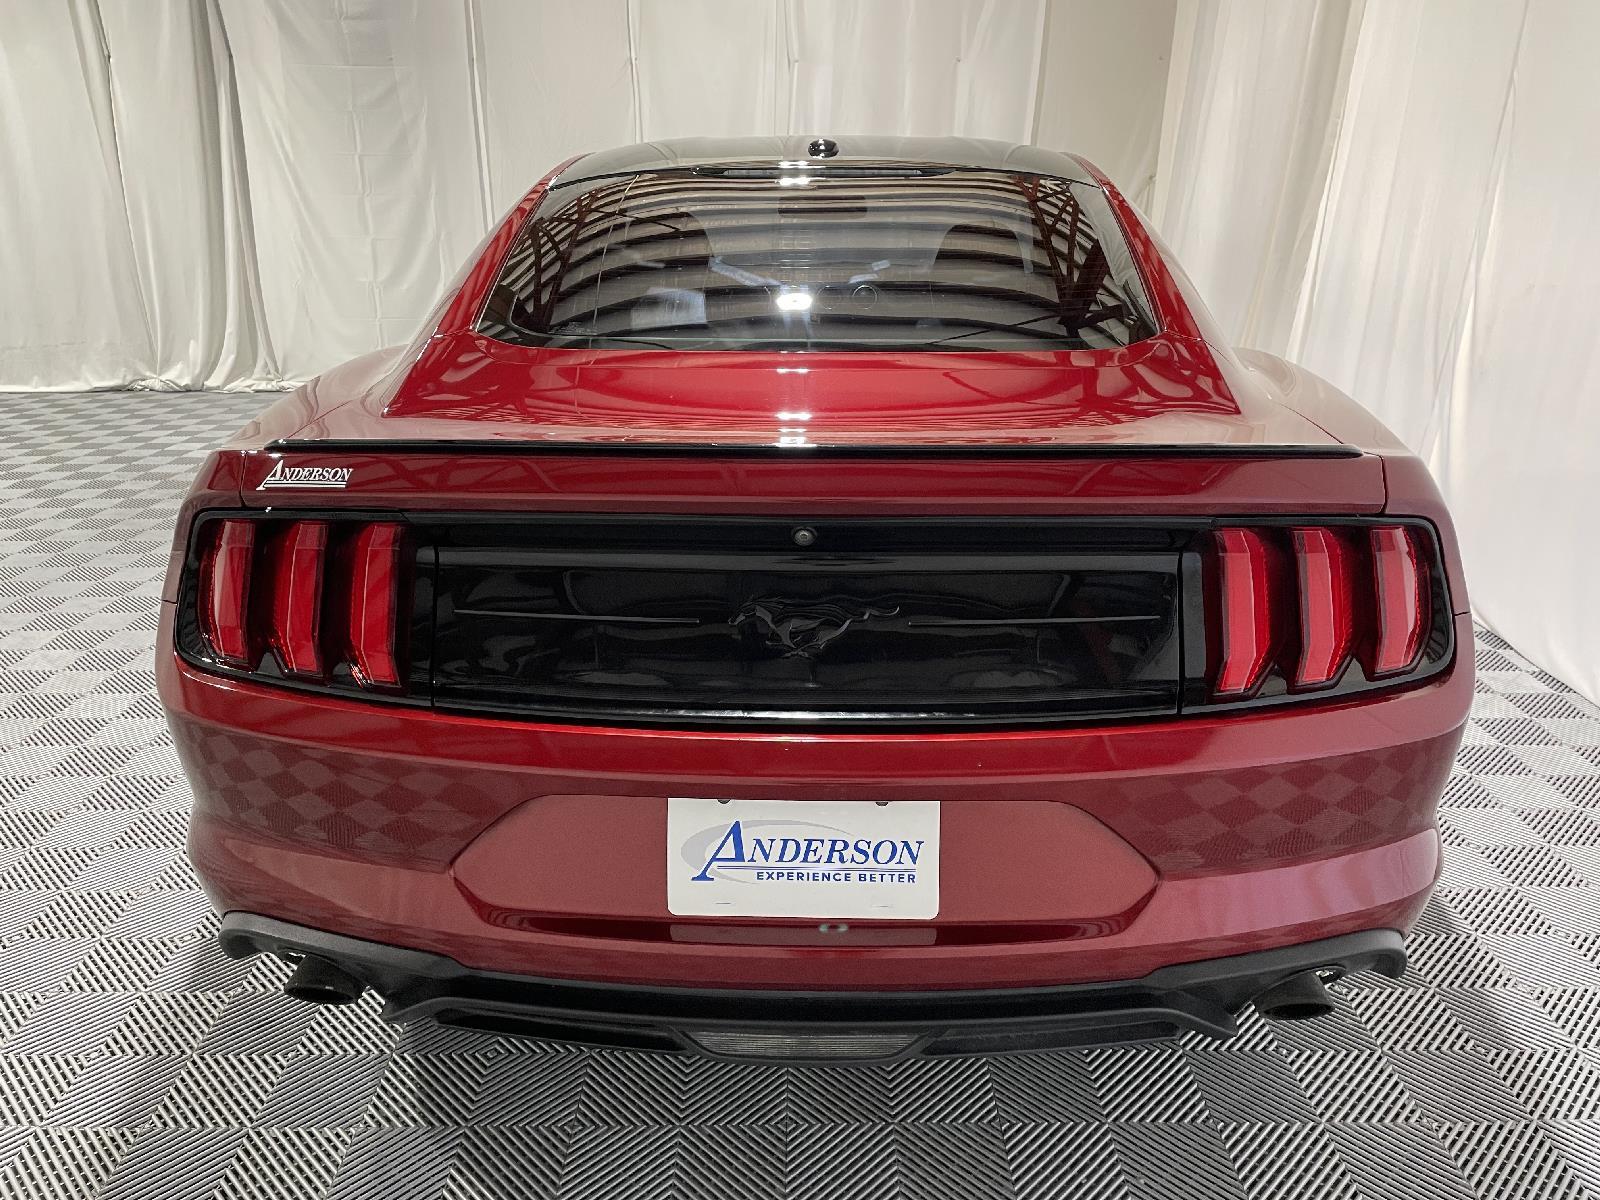 Used 2019 Ford Mustang EcoBoost Coupe for sale in St Joseph MO